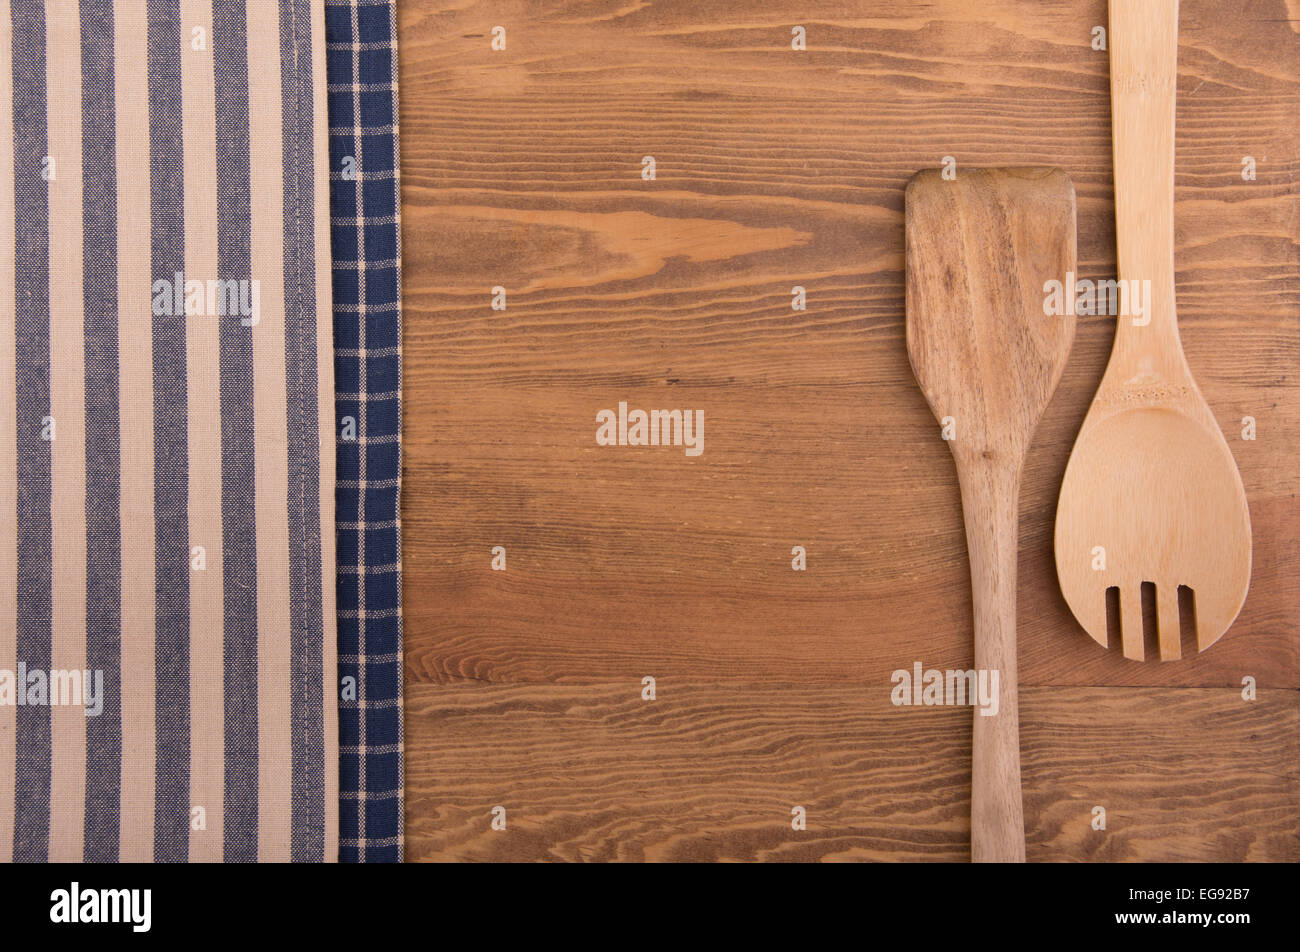 Wooden kitchen utensils and linen kitchen towels on dark wood tabletop, with copy space in the center Stock Photo